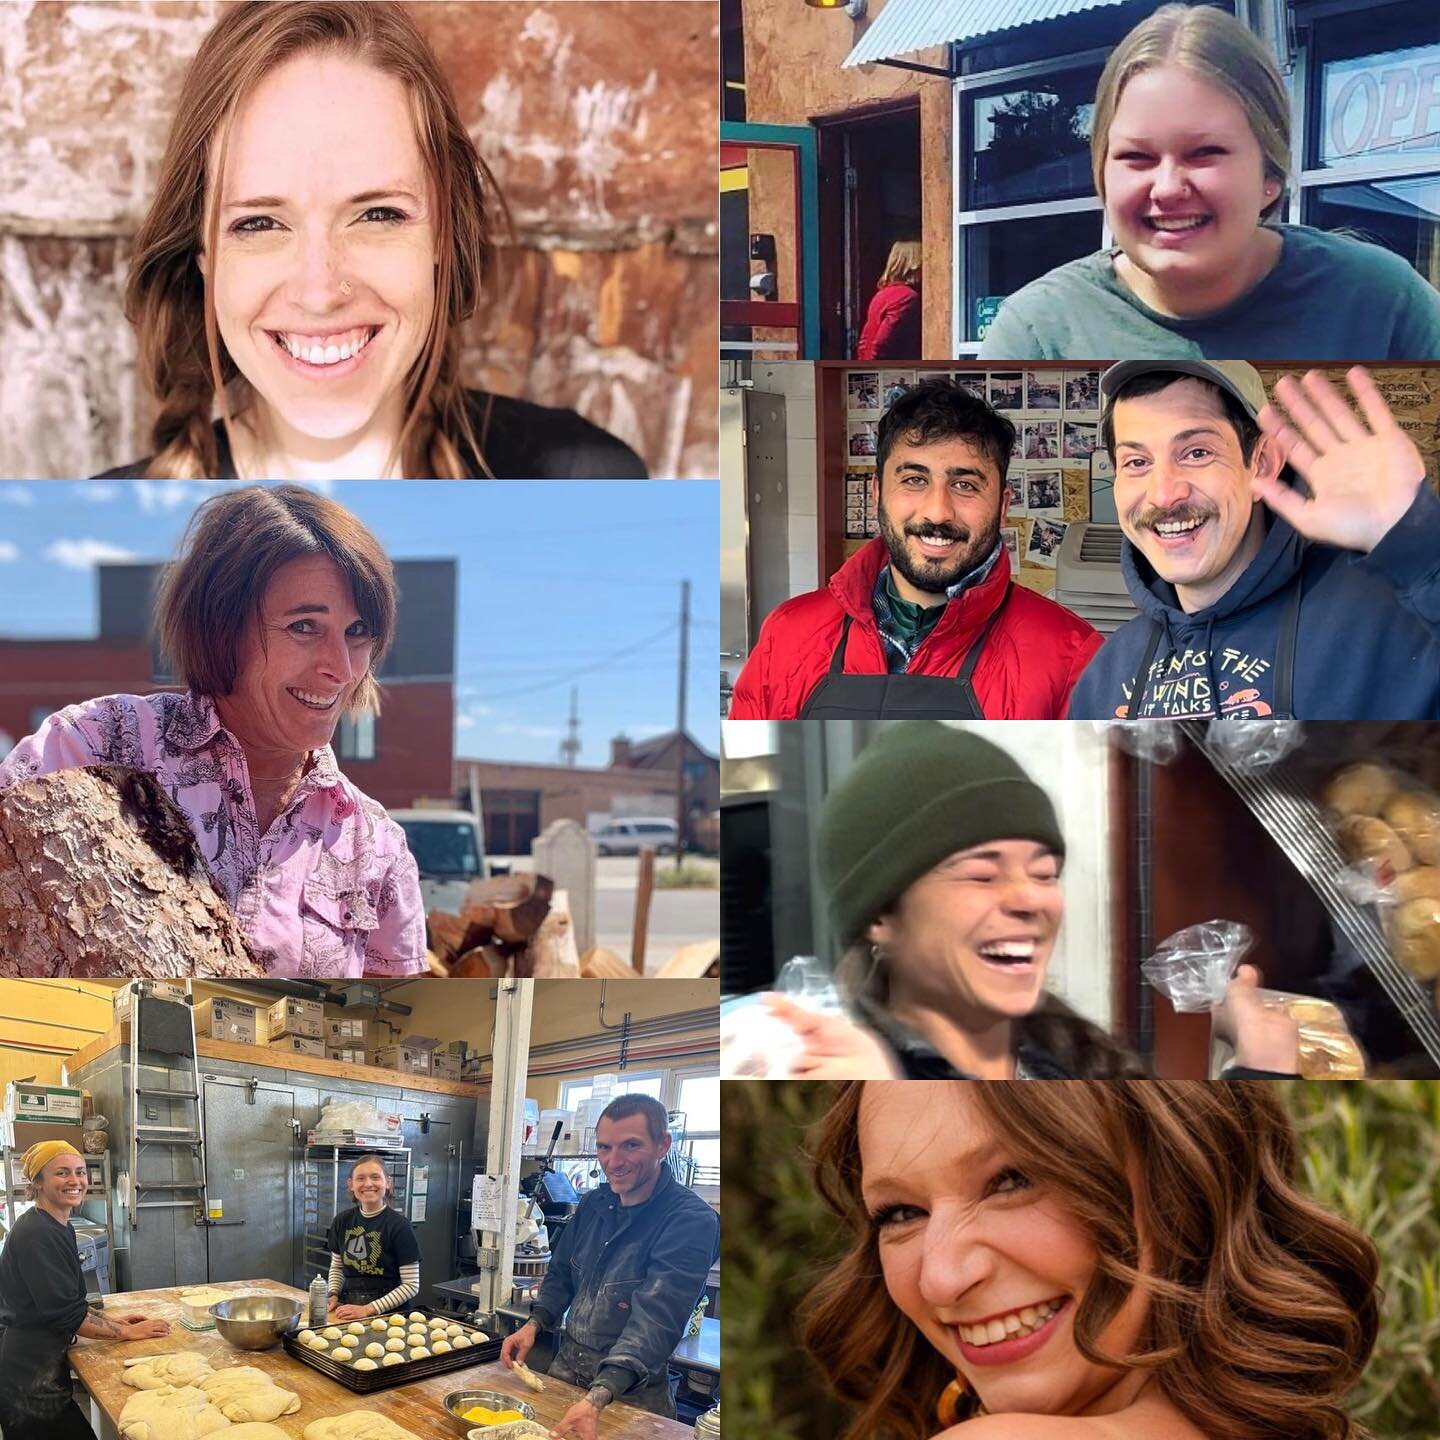 Staff appreciation post! I love each and everyone of these smiling faces. Thank you all for a great Thanksgiving and making the bakery a goofy, hardworking, beautiful place every day &hearts;️